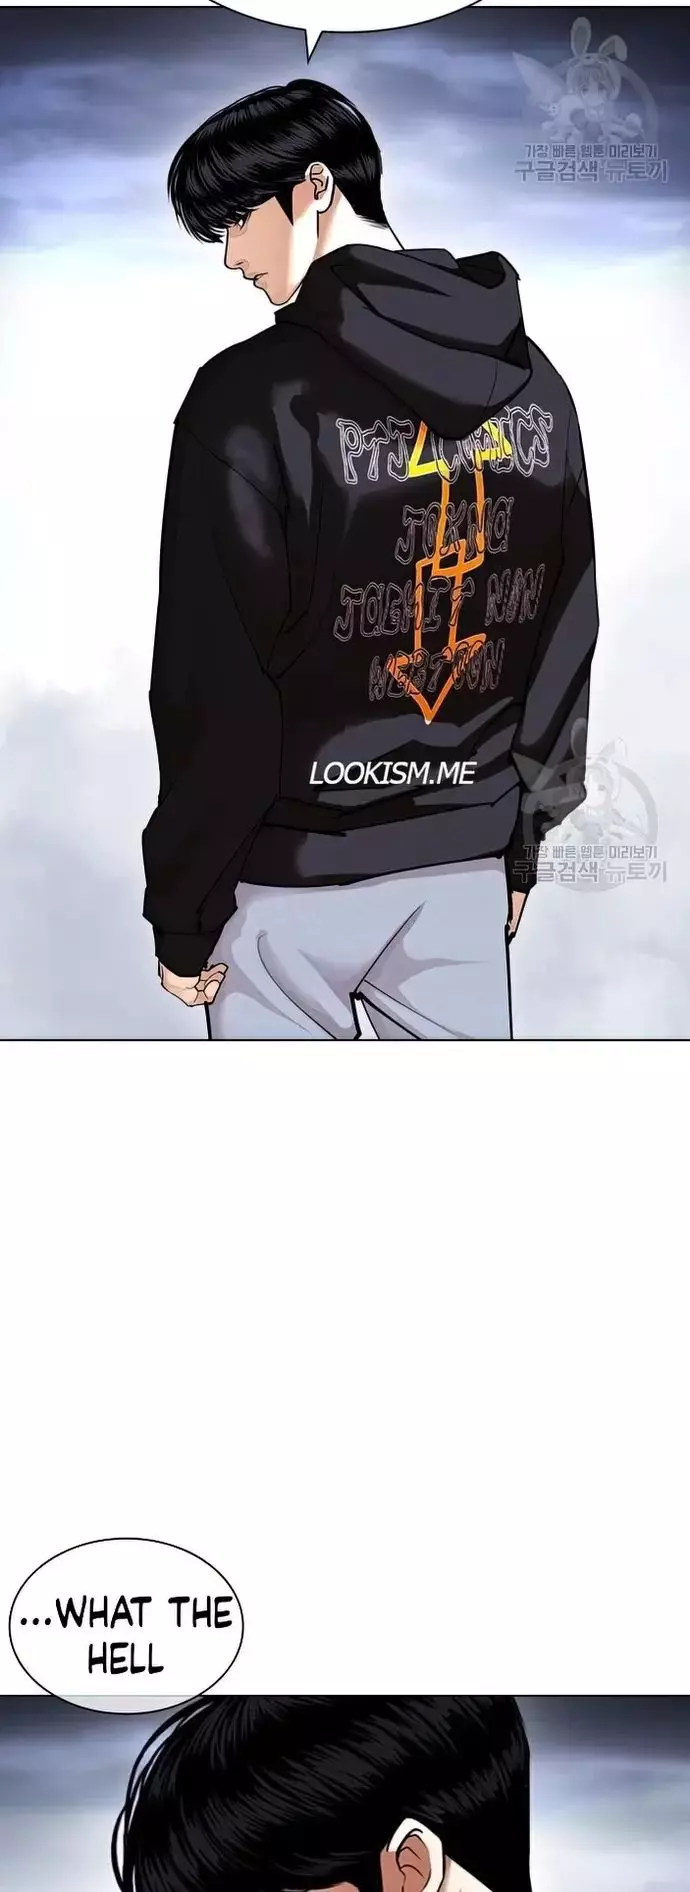 Lookism - 424 page 98-00dd2d6a